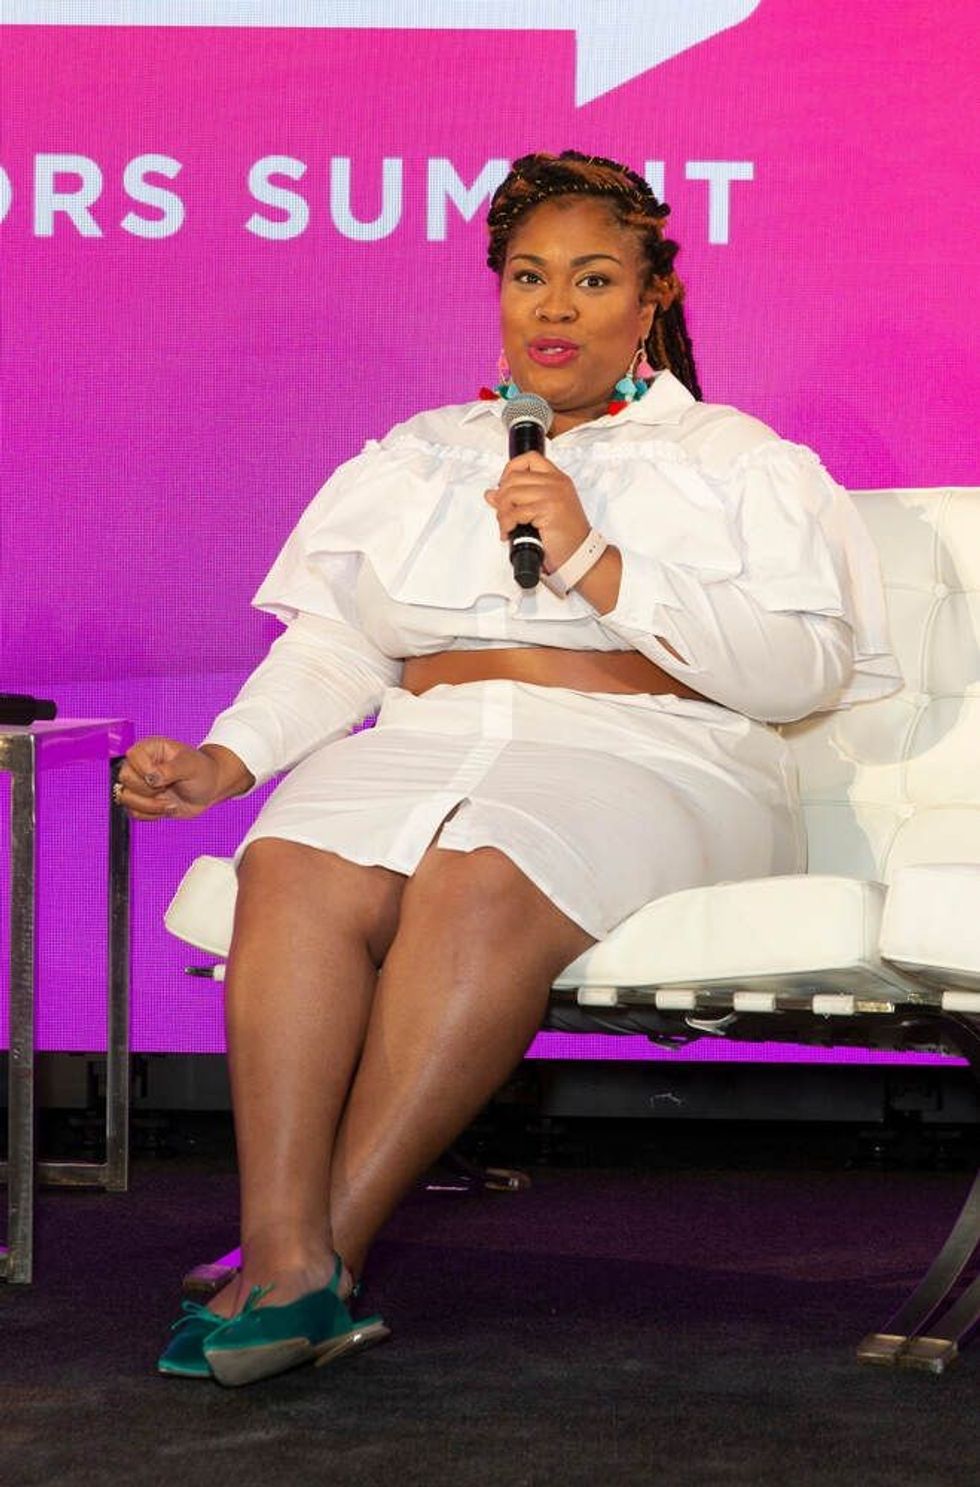 Angie Thomas attends an event